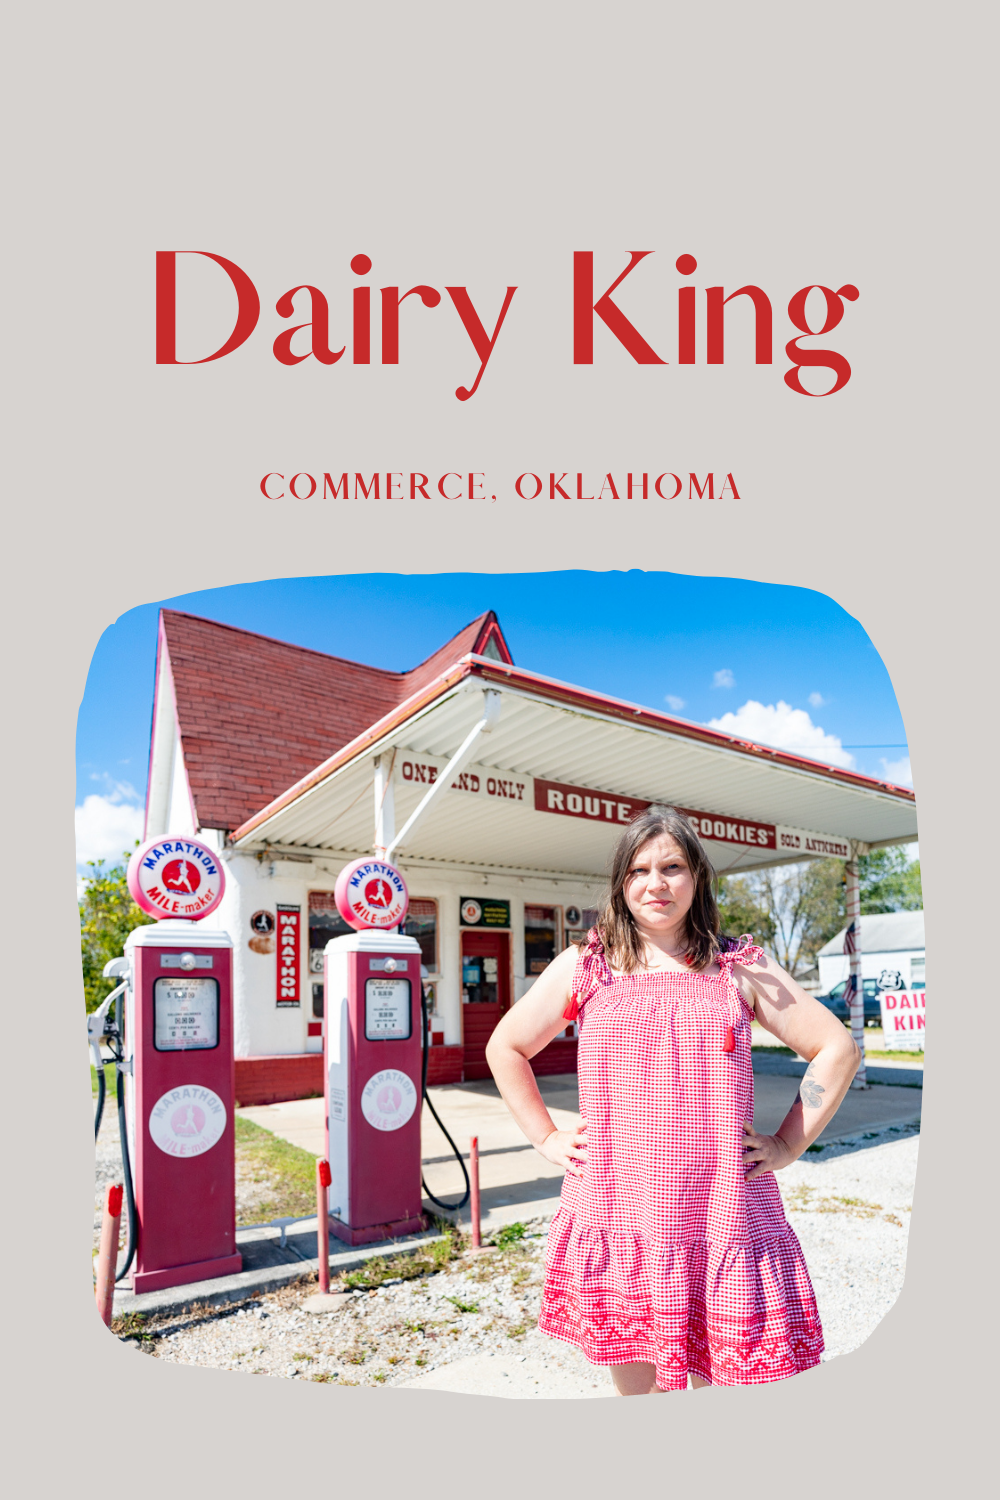 You can’t travel Route 66 without stopping at the Dairy King in Commerce, Oklahoma for some ice cream and a famous Route 66 cookie.  While they will no longer fill up your tank at the Dairy King, they will fill up your belly. Stop in for a burger, a milkshake, a banana split, and a Route 66 cookie shaped like the highway marker shield and are printed with US 66.  #RoadTripStop #Route66 #Route66RoadTrip #OklahomaRoute66 #Oklahoma #OklahomaRoadTrip #OklahomaRoadsideAttractions #RoadTrip